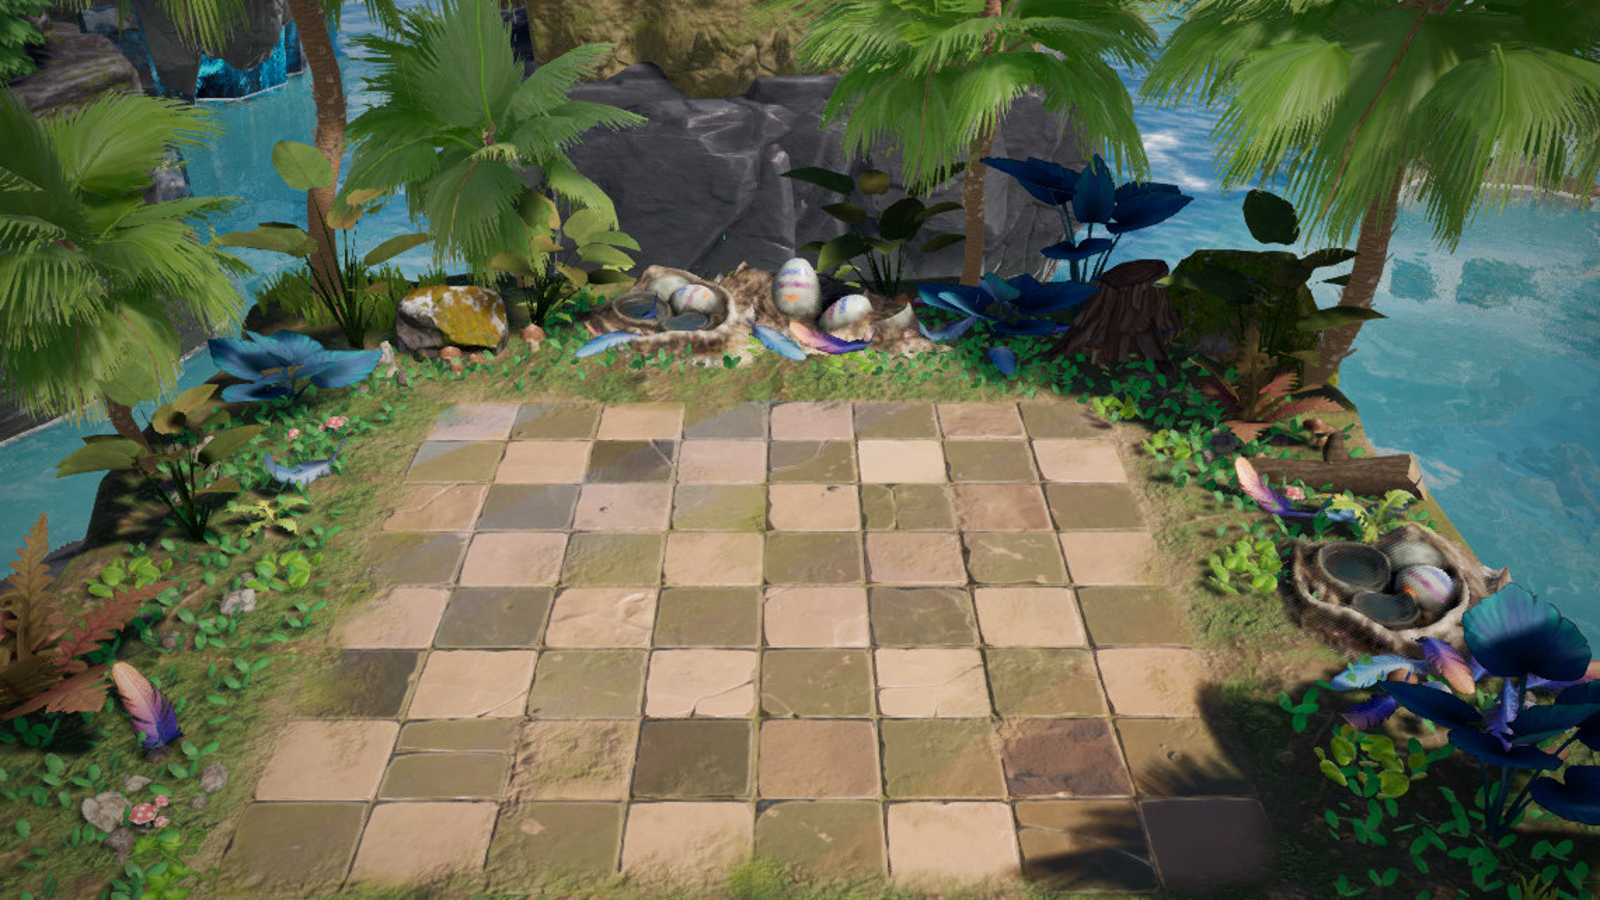 Auto Chess is getting a MOBA that looks like a Dota 2 ripoff 